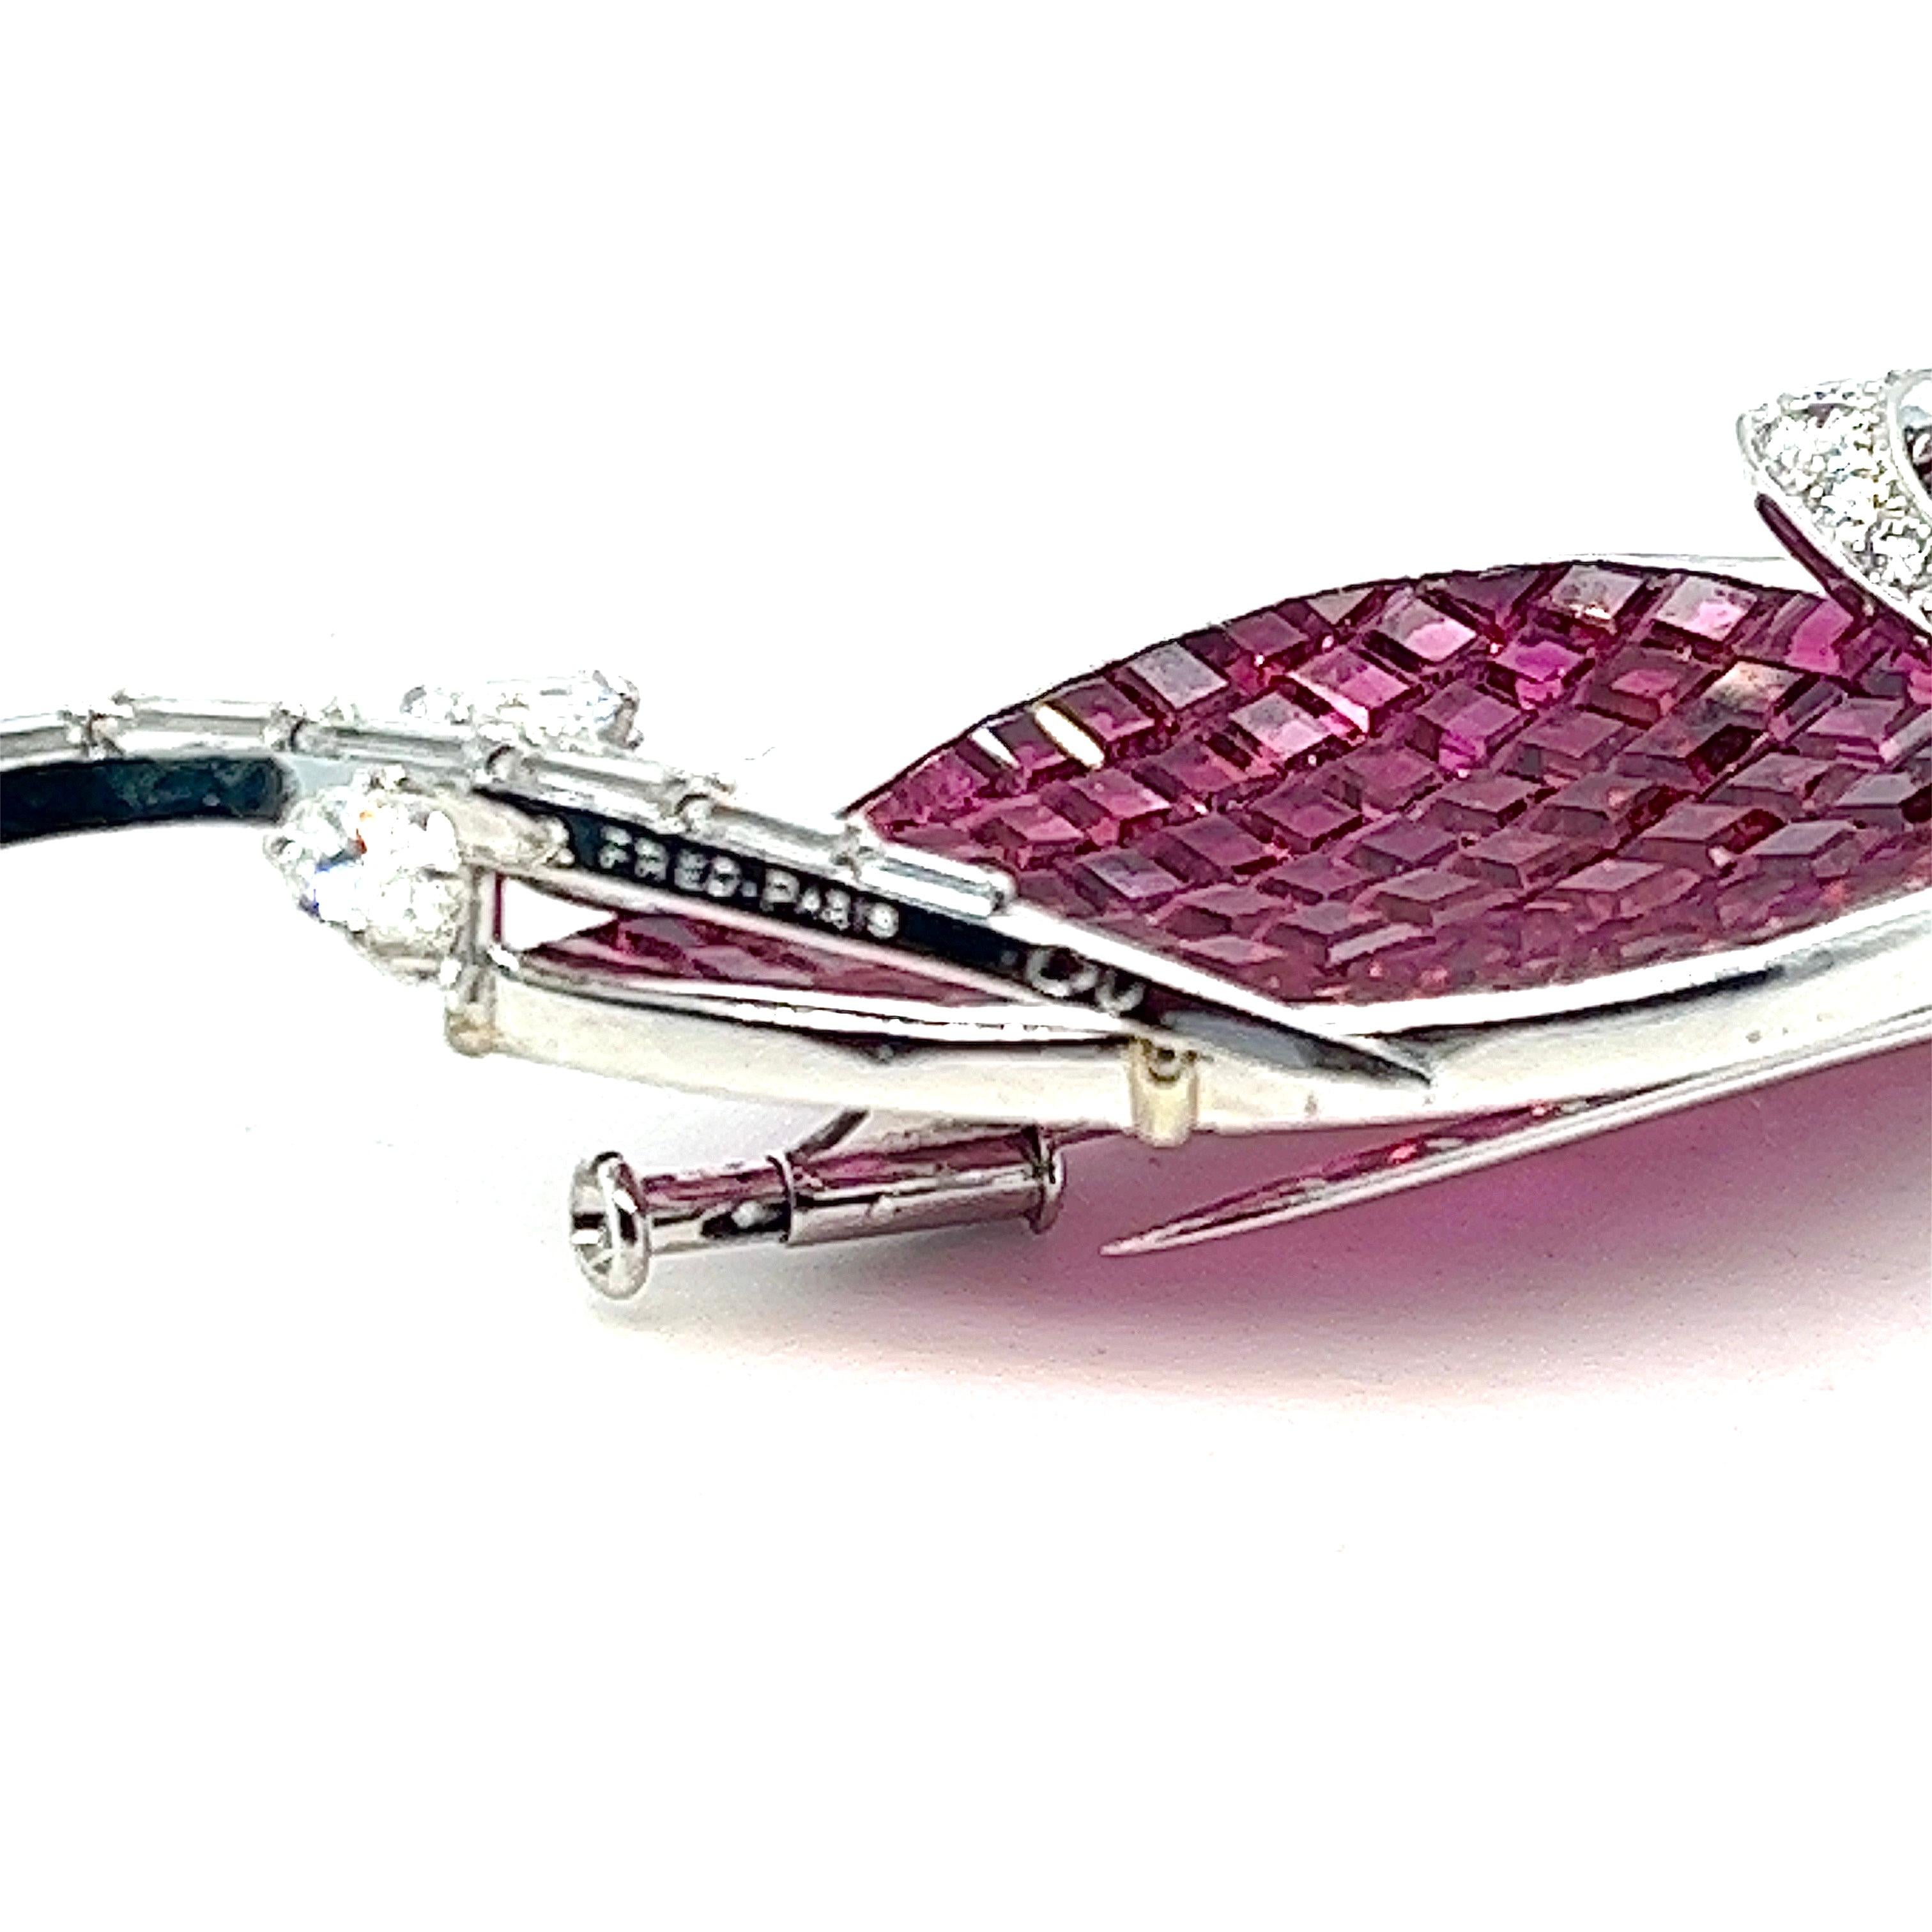 Captivating FRED Paris 18kt White Gold Ruby and Diamond Leaf Pin Brooch

Elevate your jewelry collection to new heights with this exceptional 18kt white gold pin brooch by the esteemed FRED Paris. Stamped with authentic French hallmarks, this